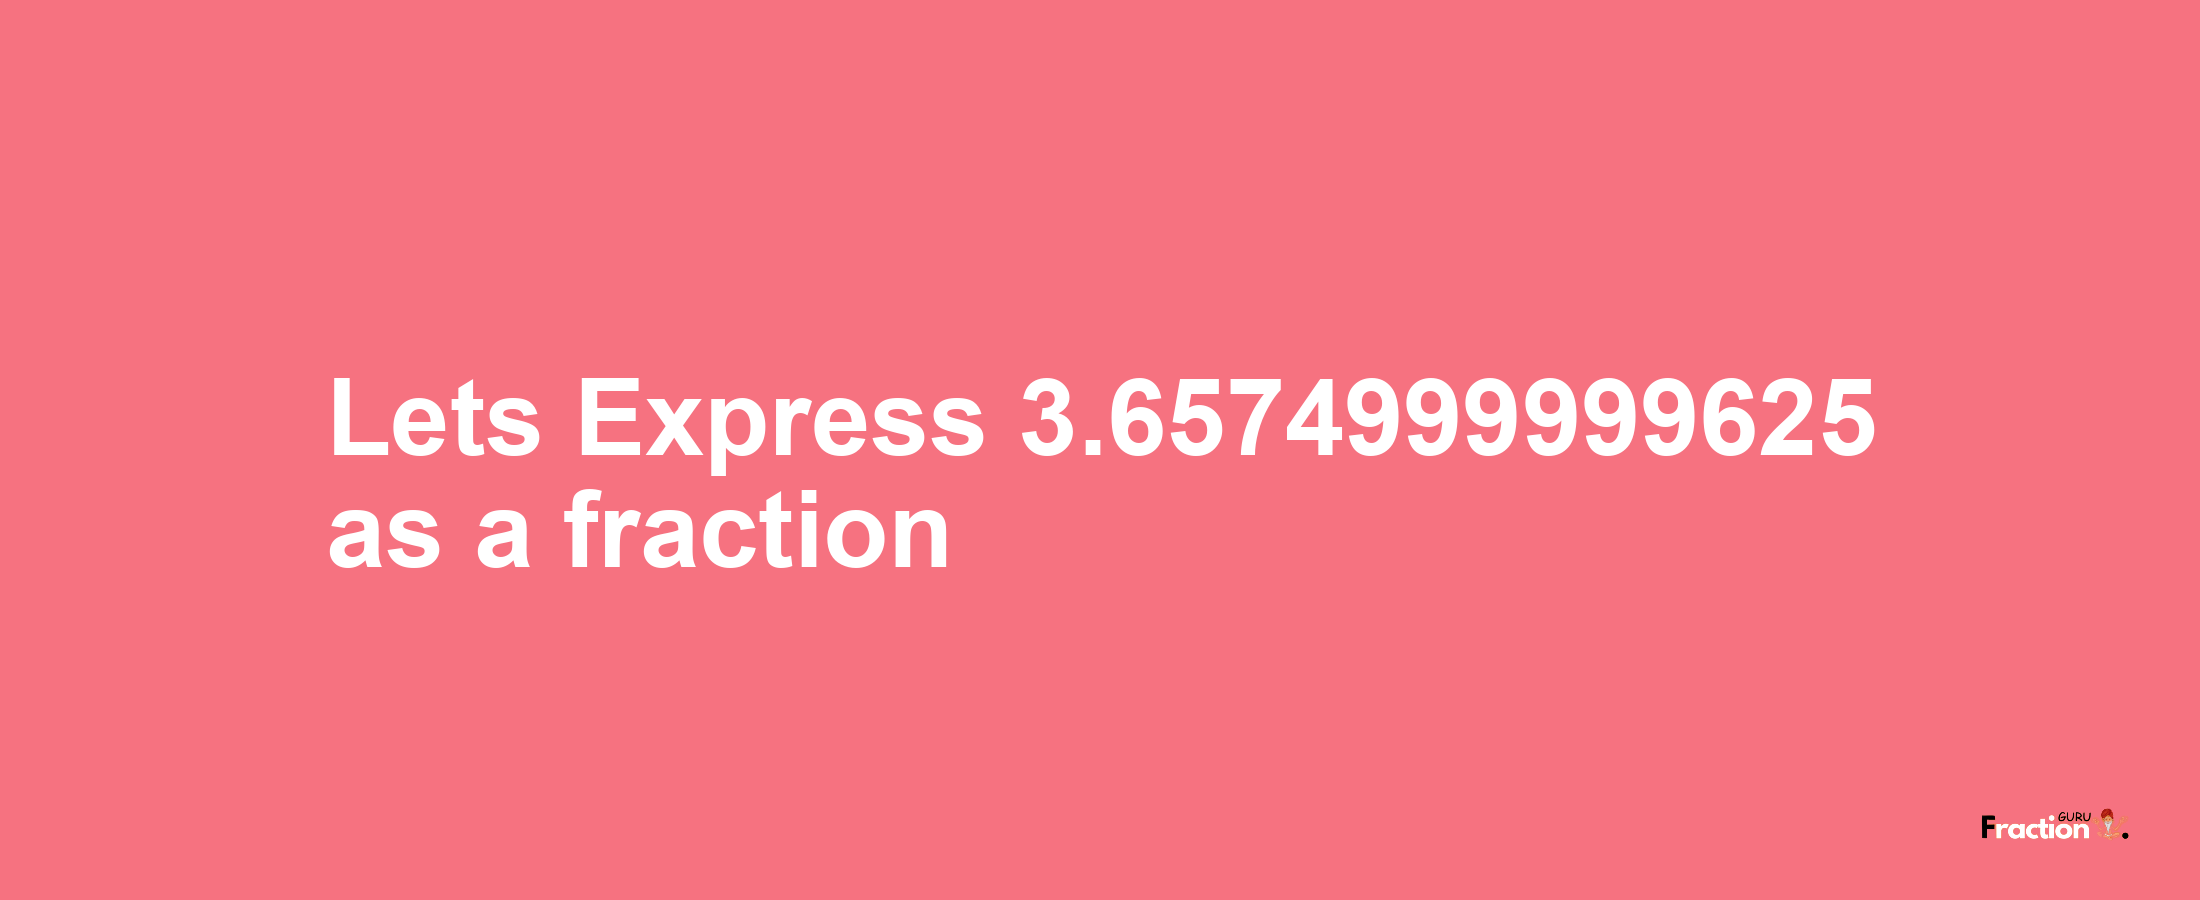 Lets Express 3.6574999999625 as afraction